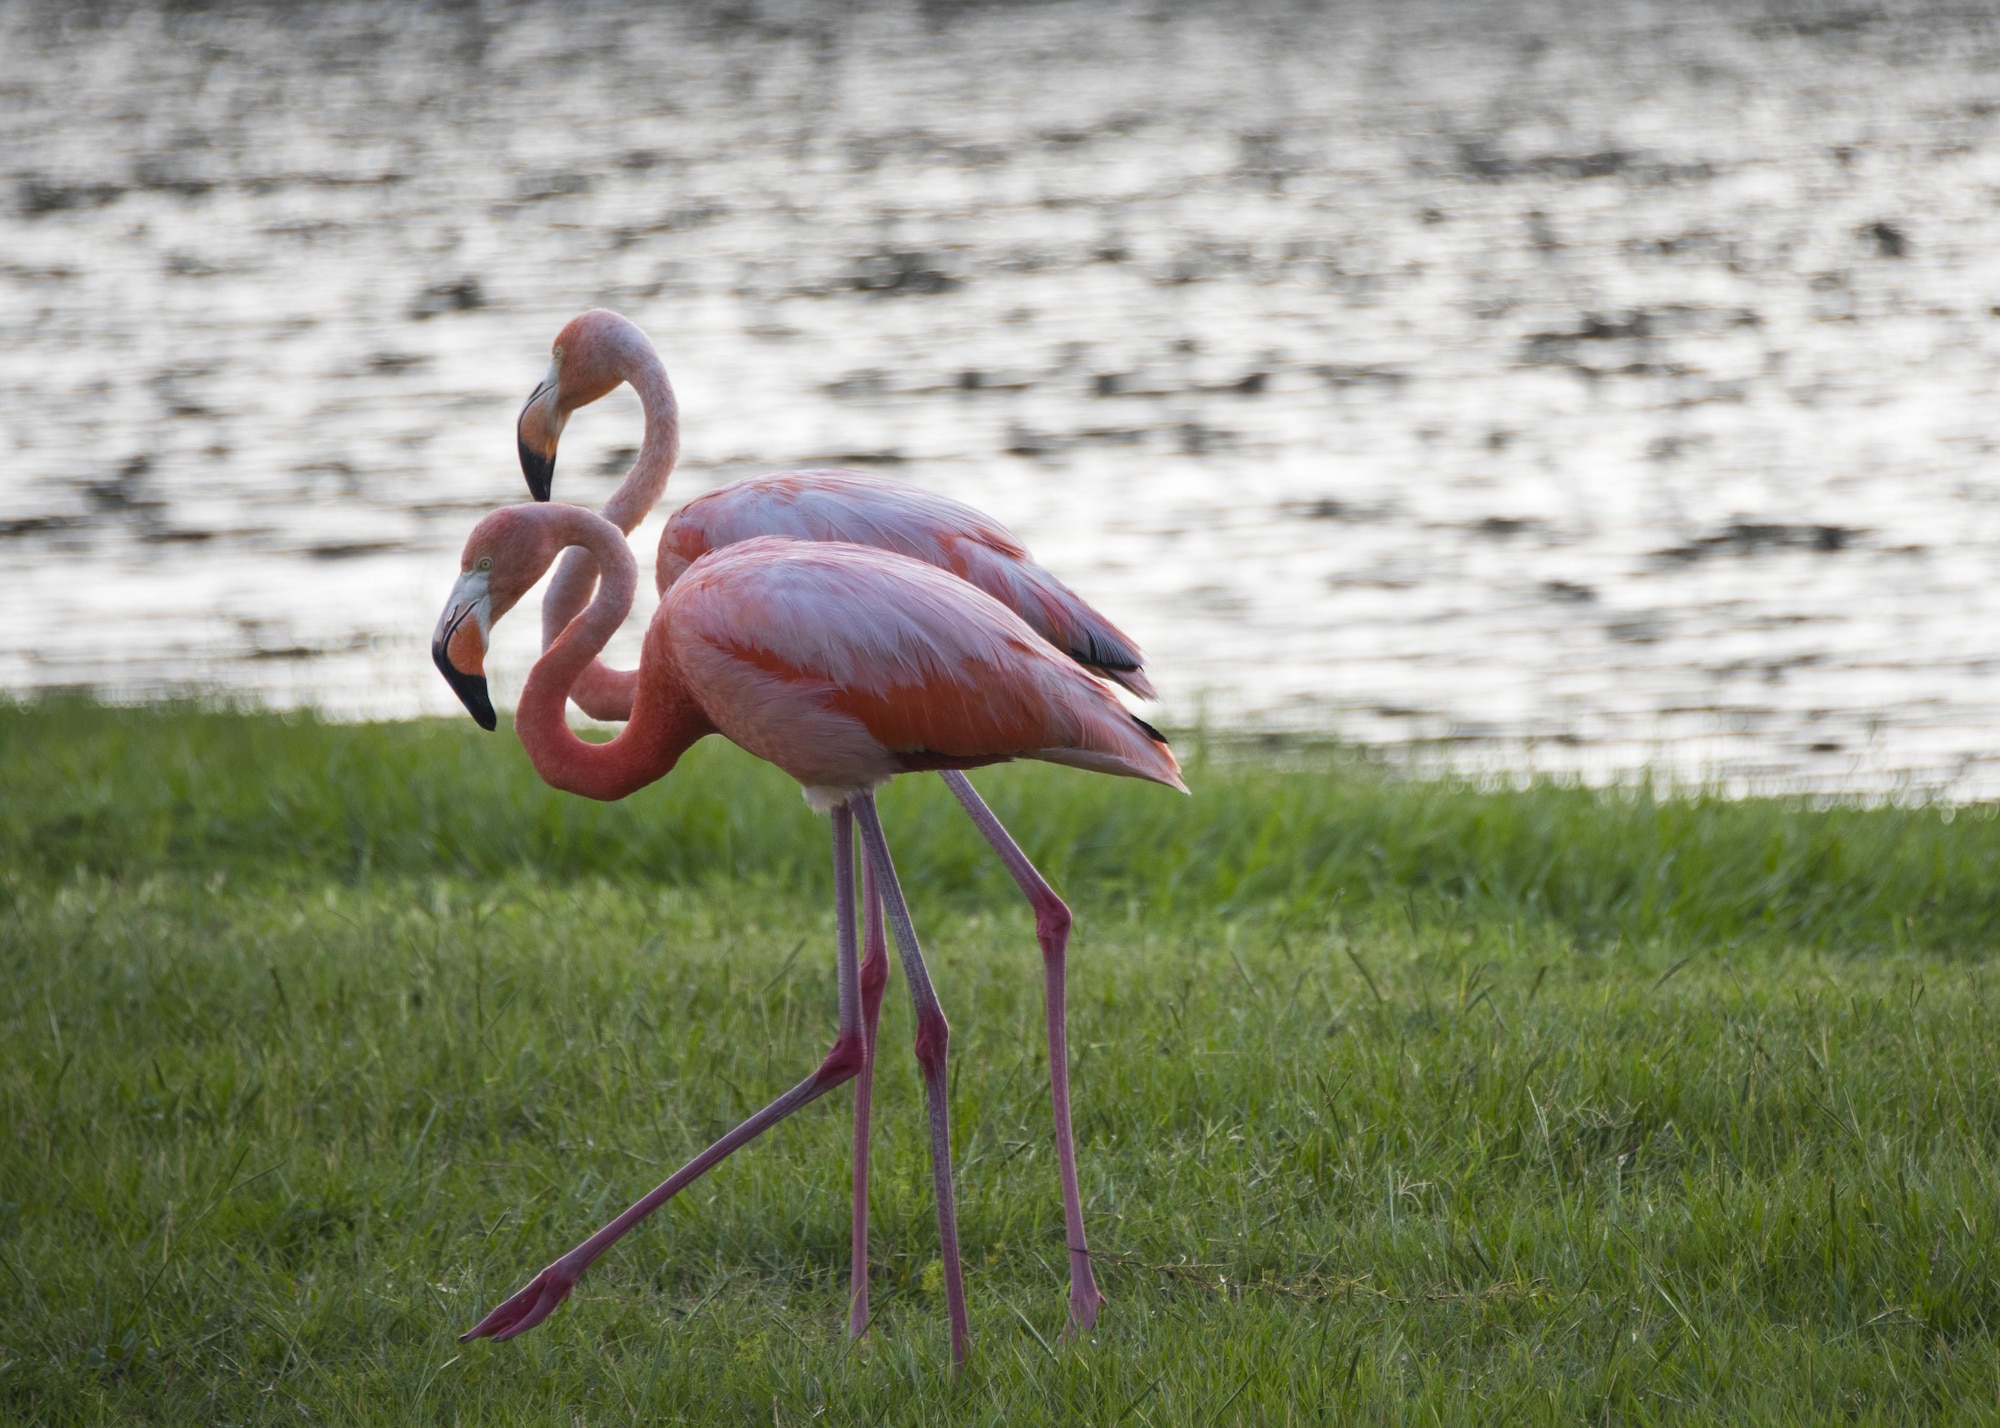 A pair of flamingos walk the bank of Weekly Pond June 23 at Eglin Air Force Base, Fla. According to a Jackson Guard biologist the flamingos may be here because they were caught in a storm or seeking shelter from a weather front. (U.S. Air Force photo/Ilka Cole) 